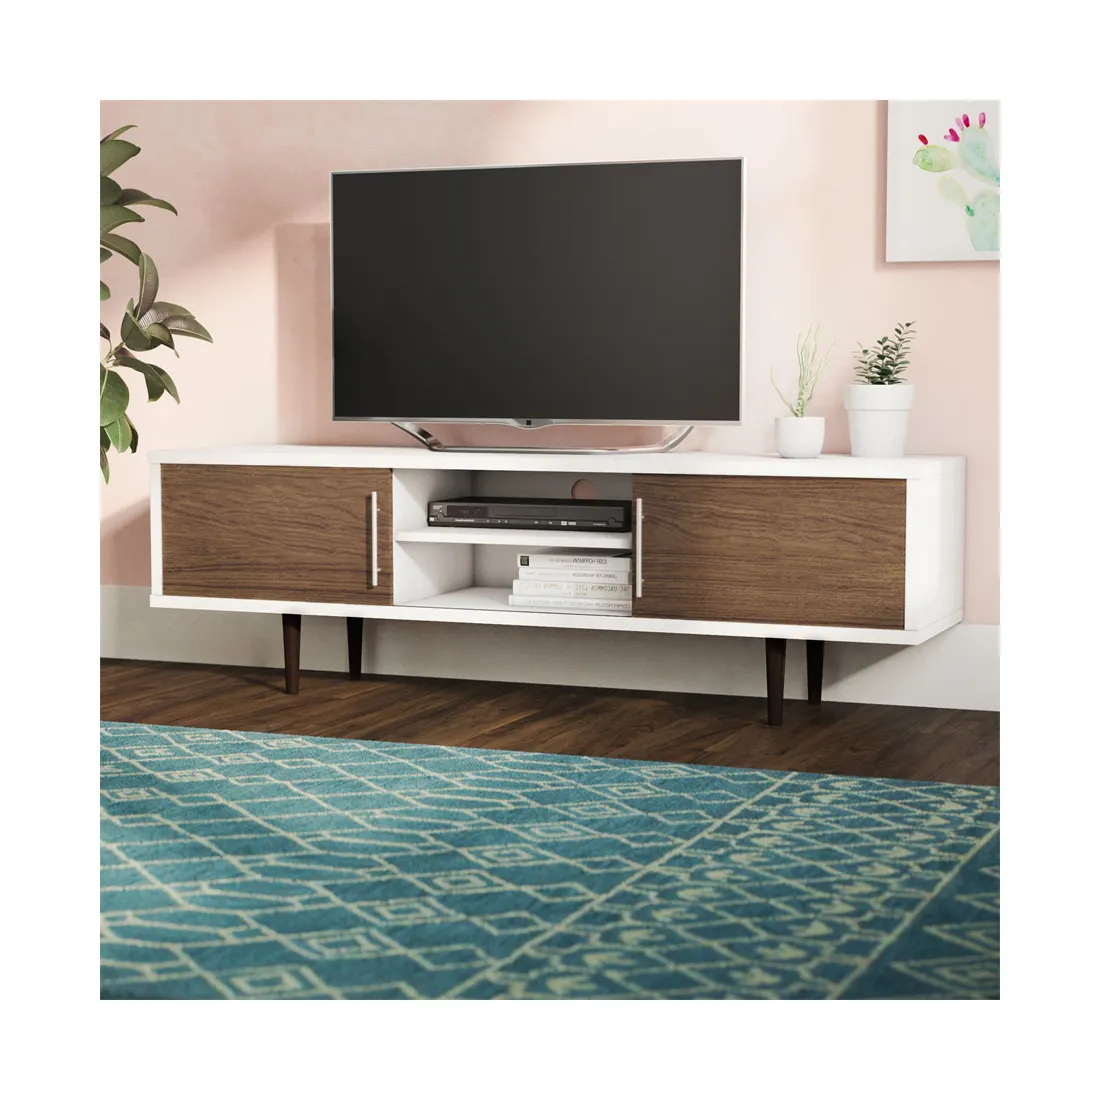 TV Cabinet Classic Tv Wall Modern Modern Panel Buy In China Units Modern Cabinet Home Furniture Wall Set TV Cabinet